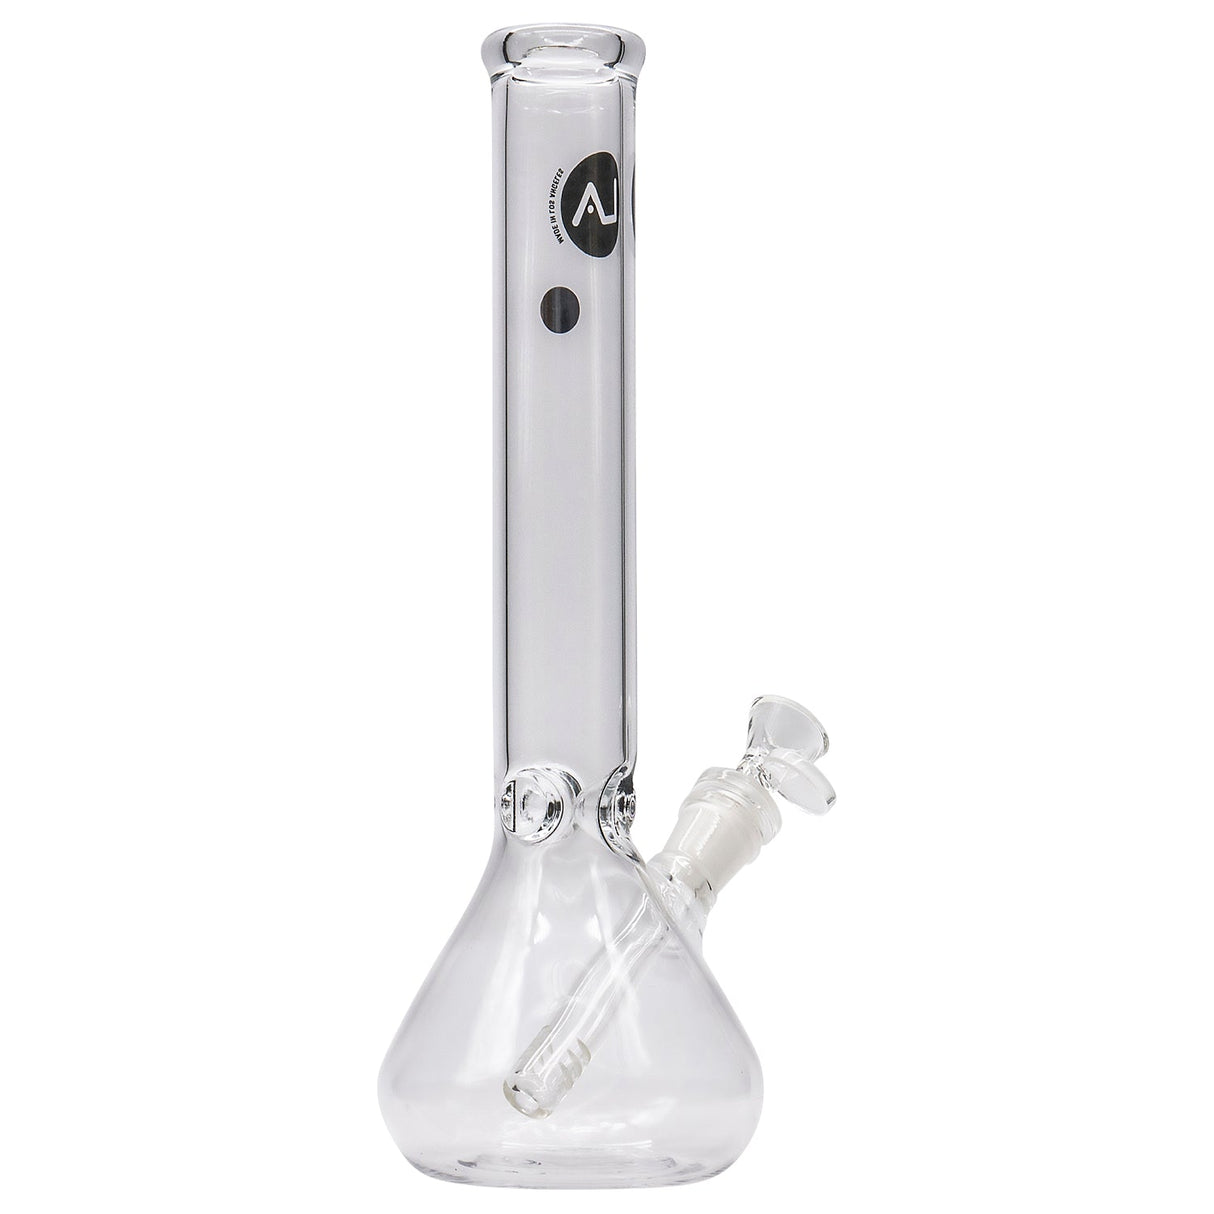 LA Pipes 12" Classic Beaker Bong made of Borosilicate Glass, Front View on White Background